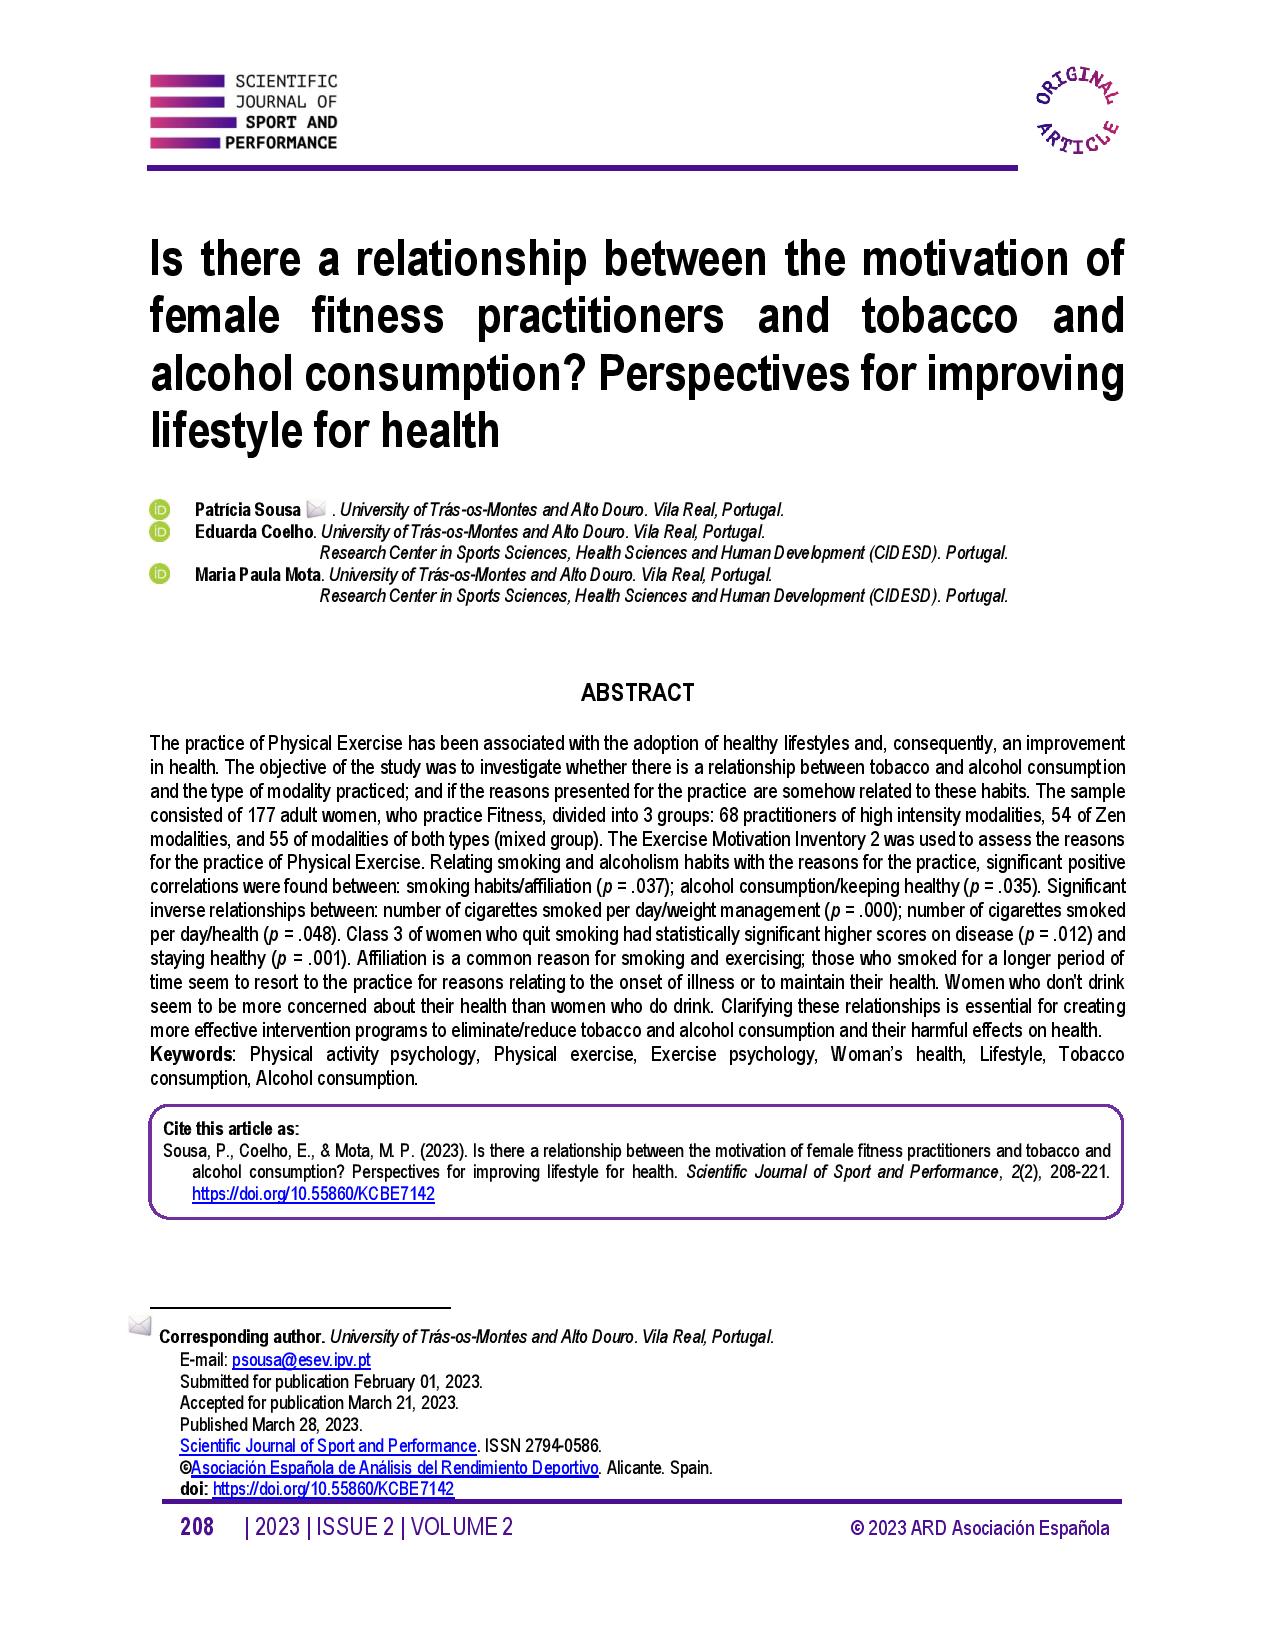 Is there a relationship between the motivation of female fitness practitioners and tobacco and alcohol consumption? Perspectives for improving lifestyle for health